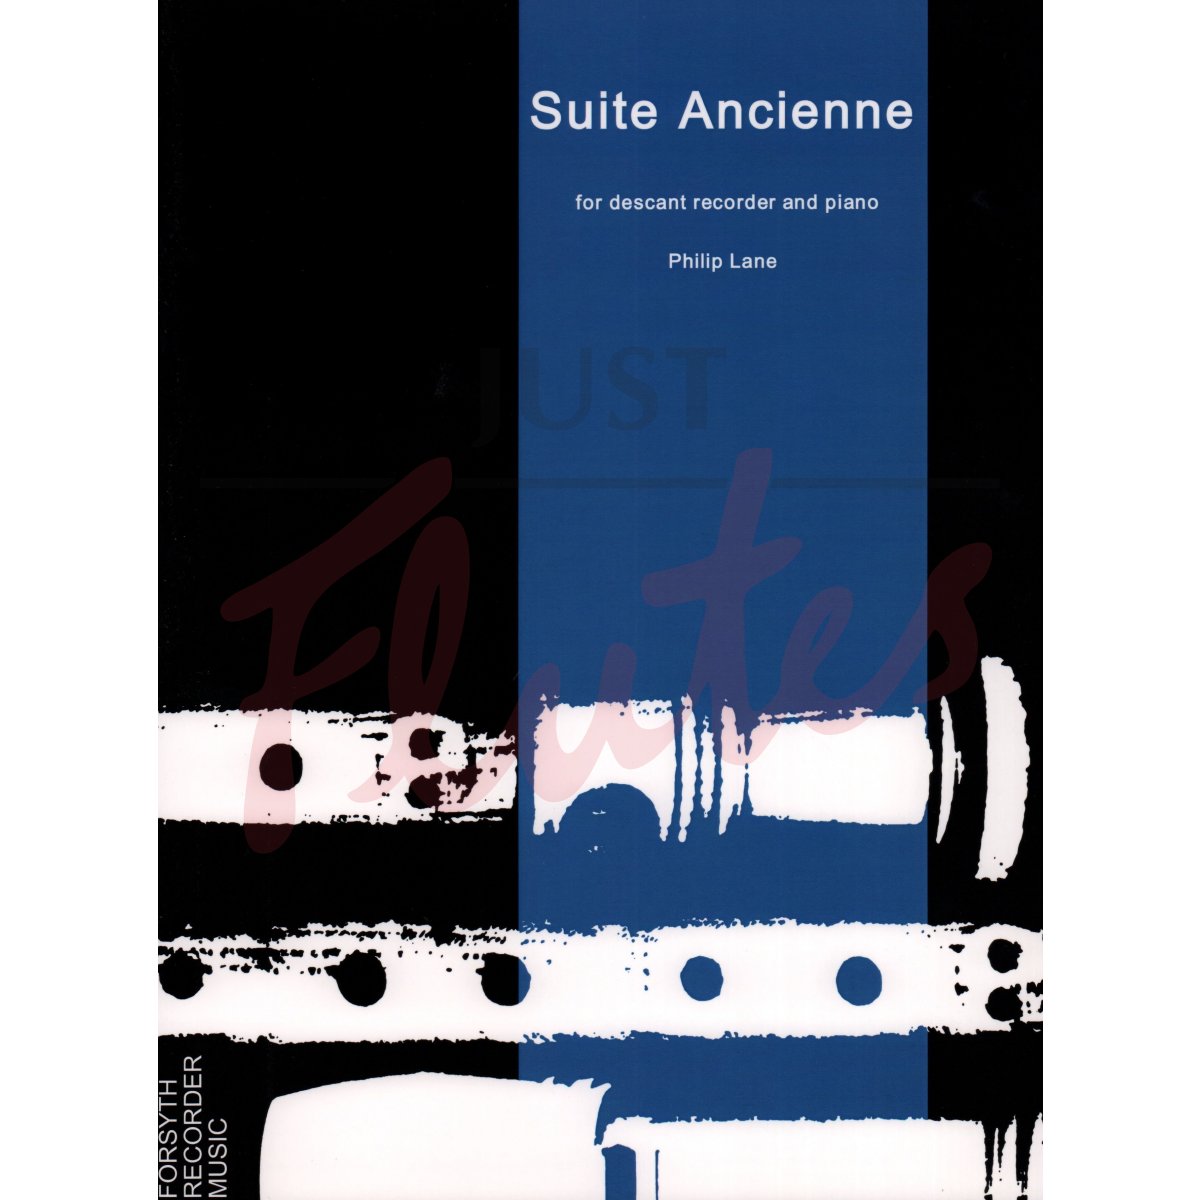 Suite Ancienne for Descant Recorder and Piano